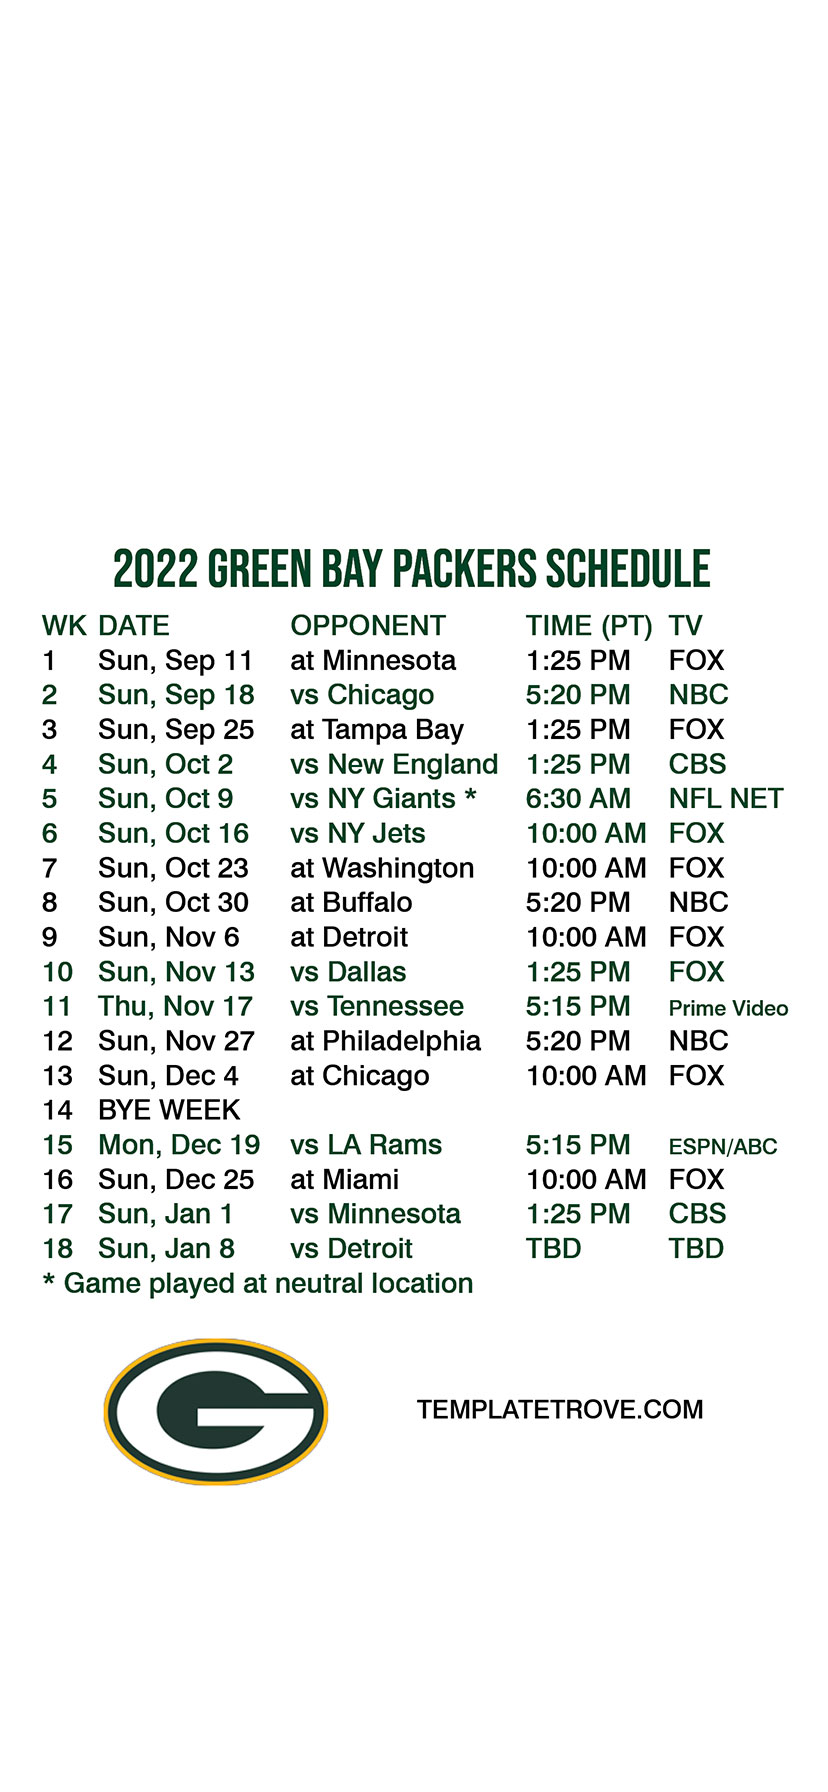 2022-2023 Green Bay Packers Lock Screen Schedule for iPhone 6-7-8 Plus